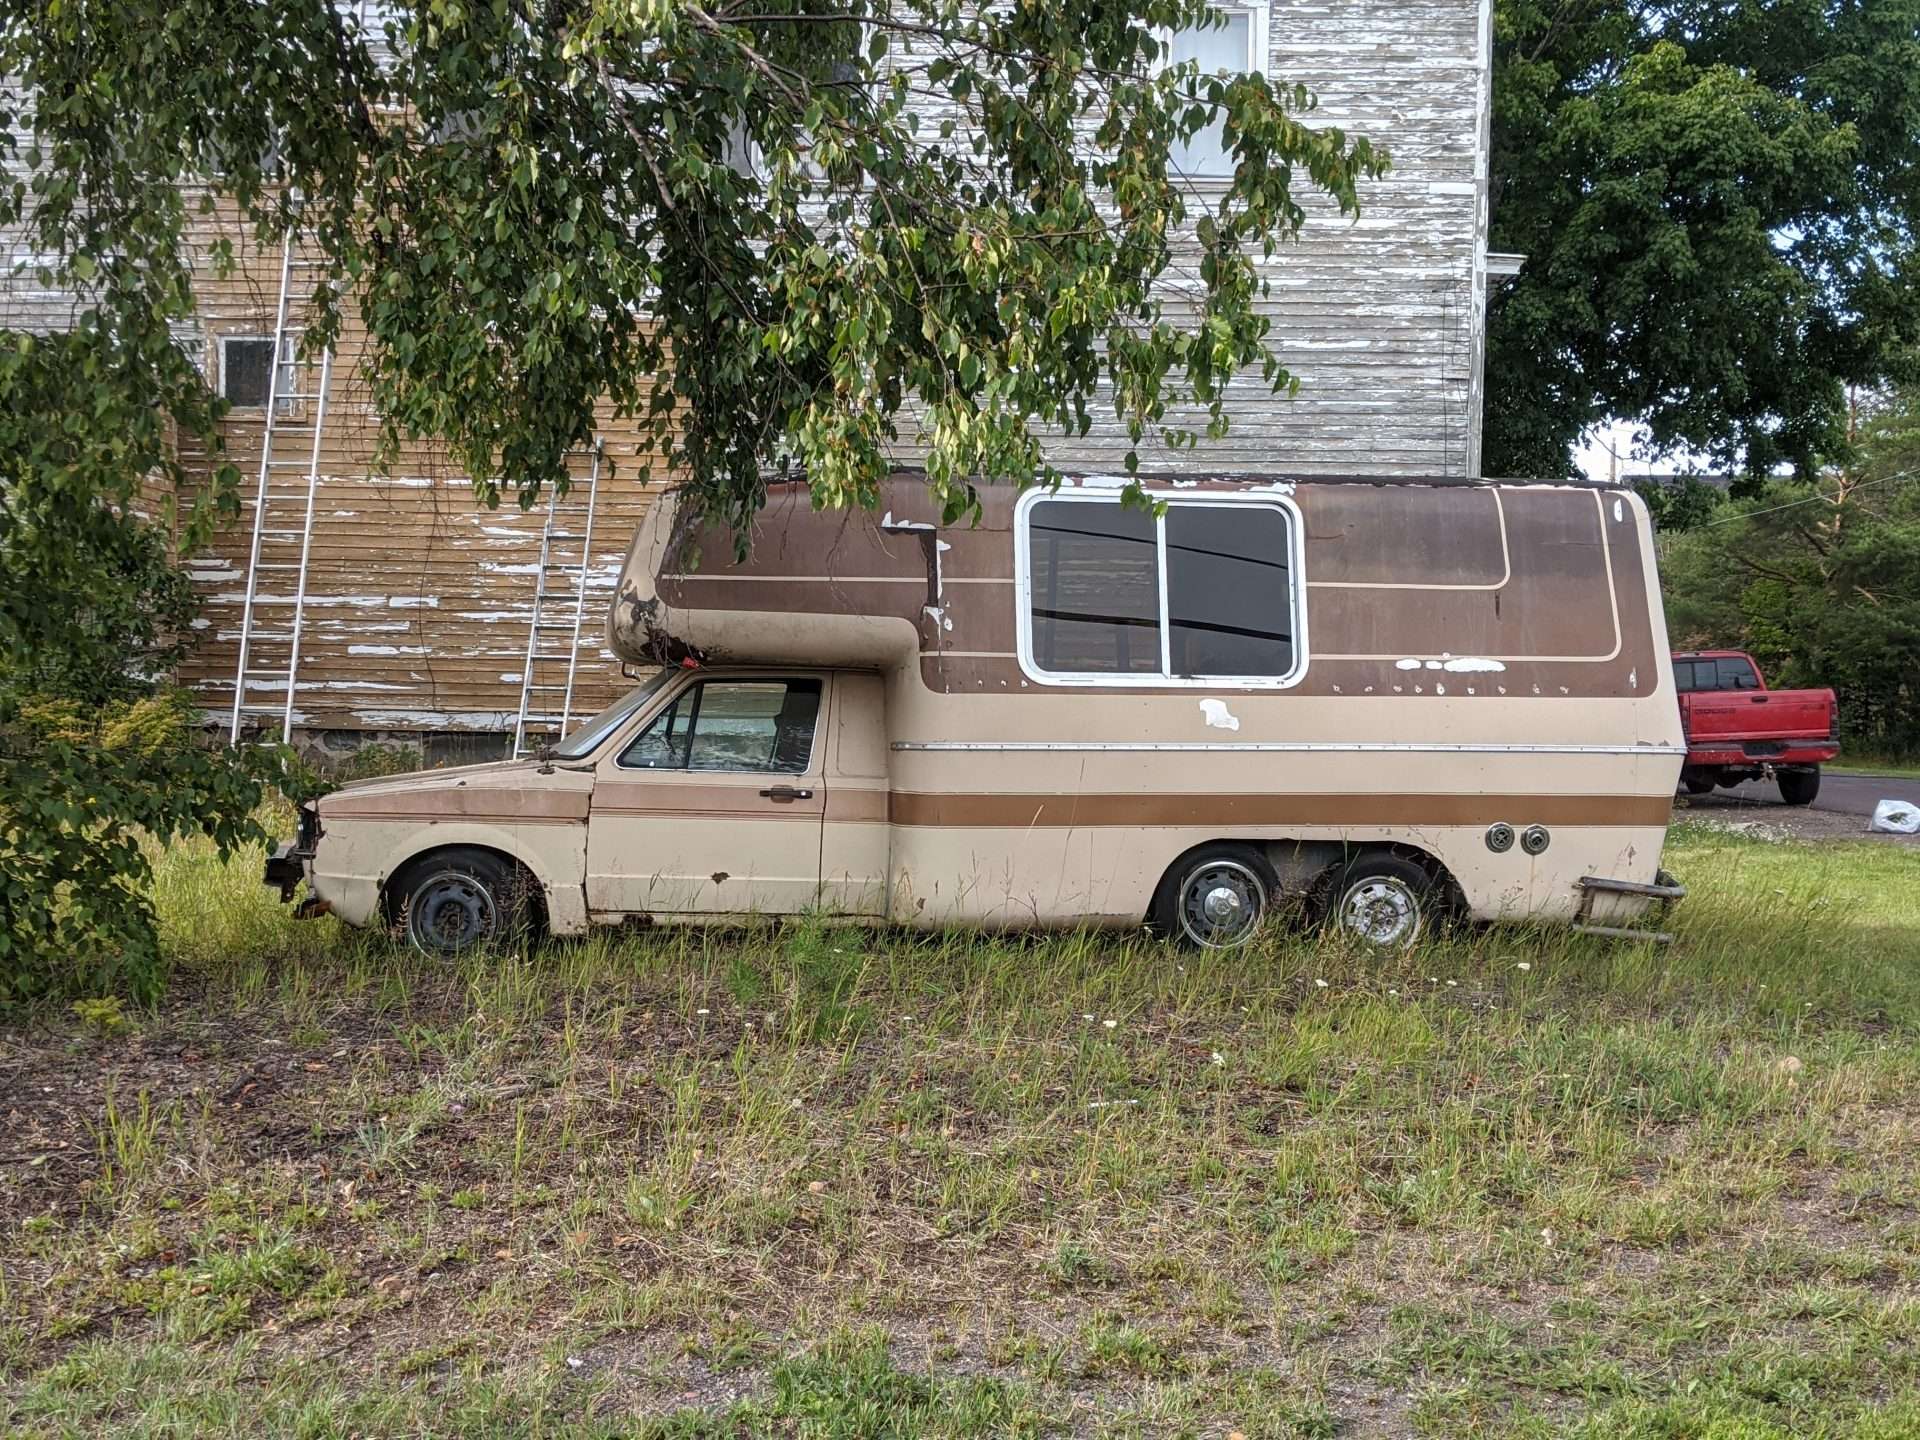 Old RV rusted in the grass